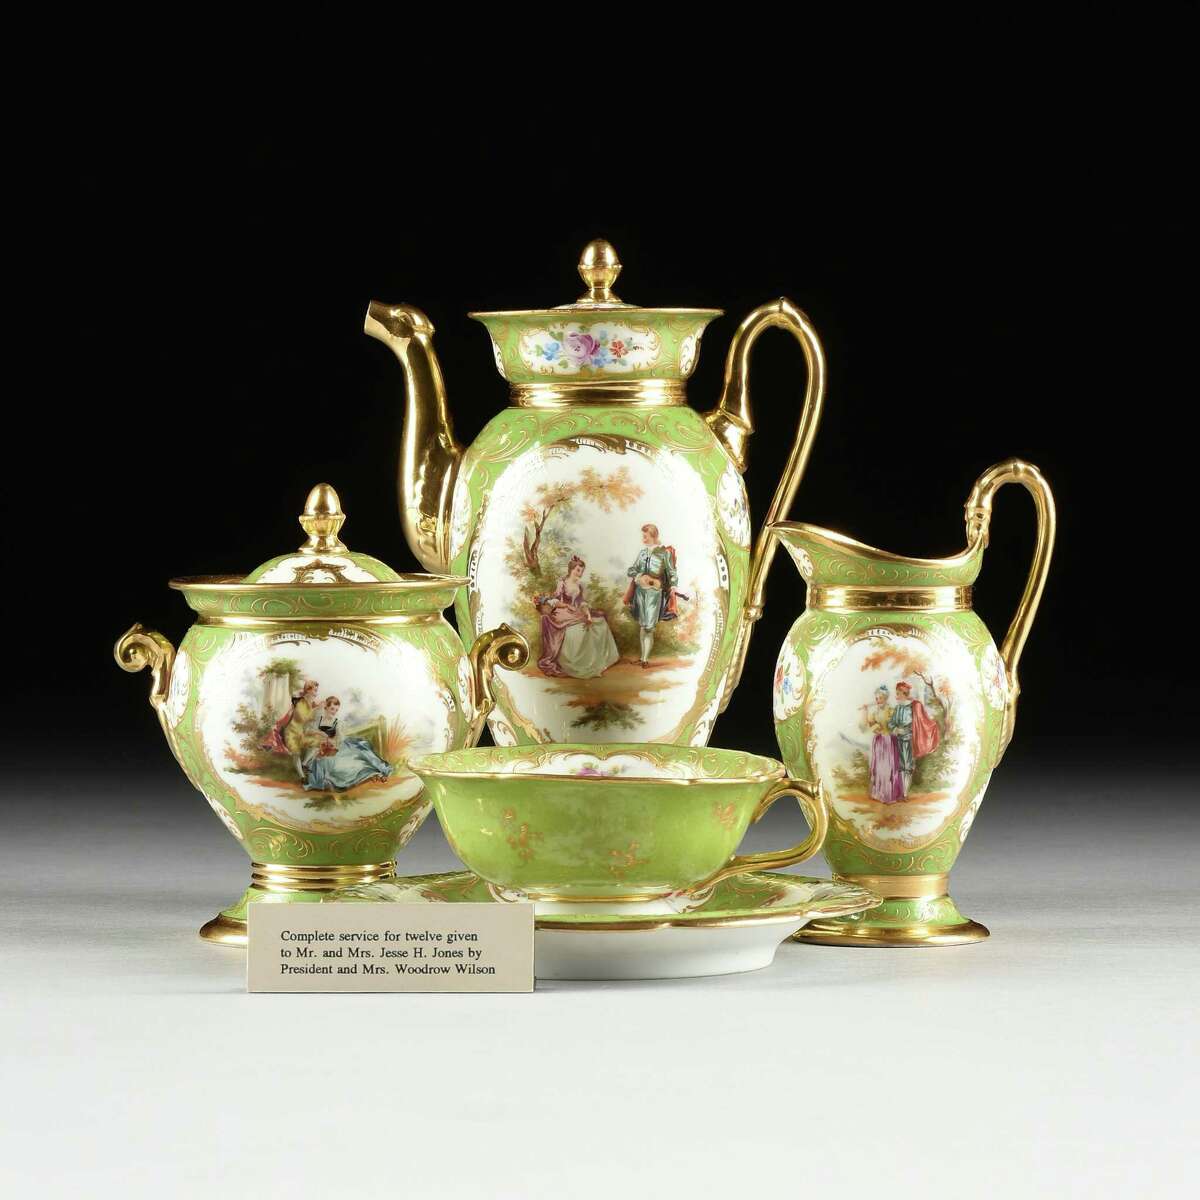 A 27-piece Dresden gilt and green ground porcelain coffee service by Richard Klemm, German, early 20th century, will be part of virtual auction Oct. 1, 2022, by Simpson Galleries. The auction includes several items from the estate of Jesse H. Jones and his wife Mary Gibbs Jones; the items had been given to Houston Endowment, a nonprofit founded by the Joneses.